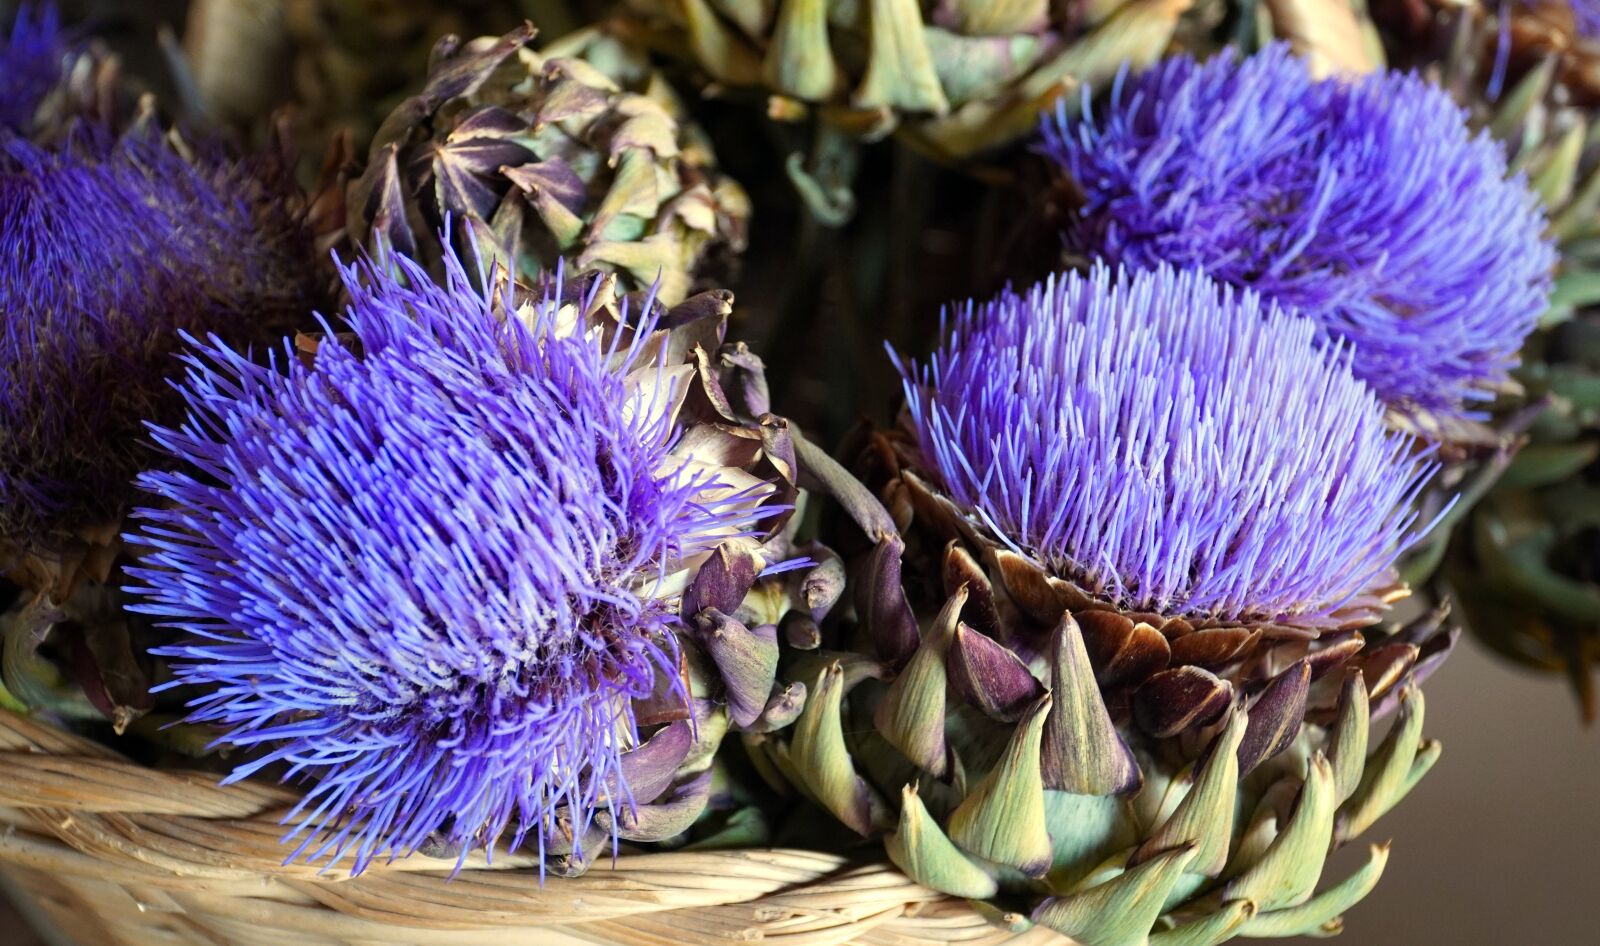 Sony a6400 + Sony E PZ 18-105mm F4 G OSS sample photo. Artichokes, flowers, vegetables photography